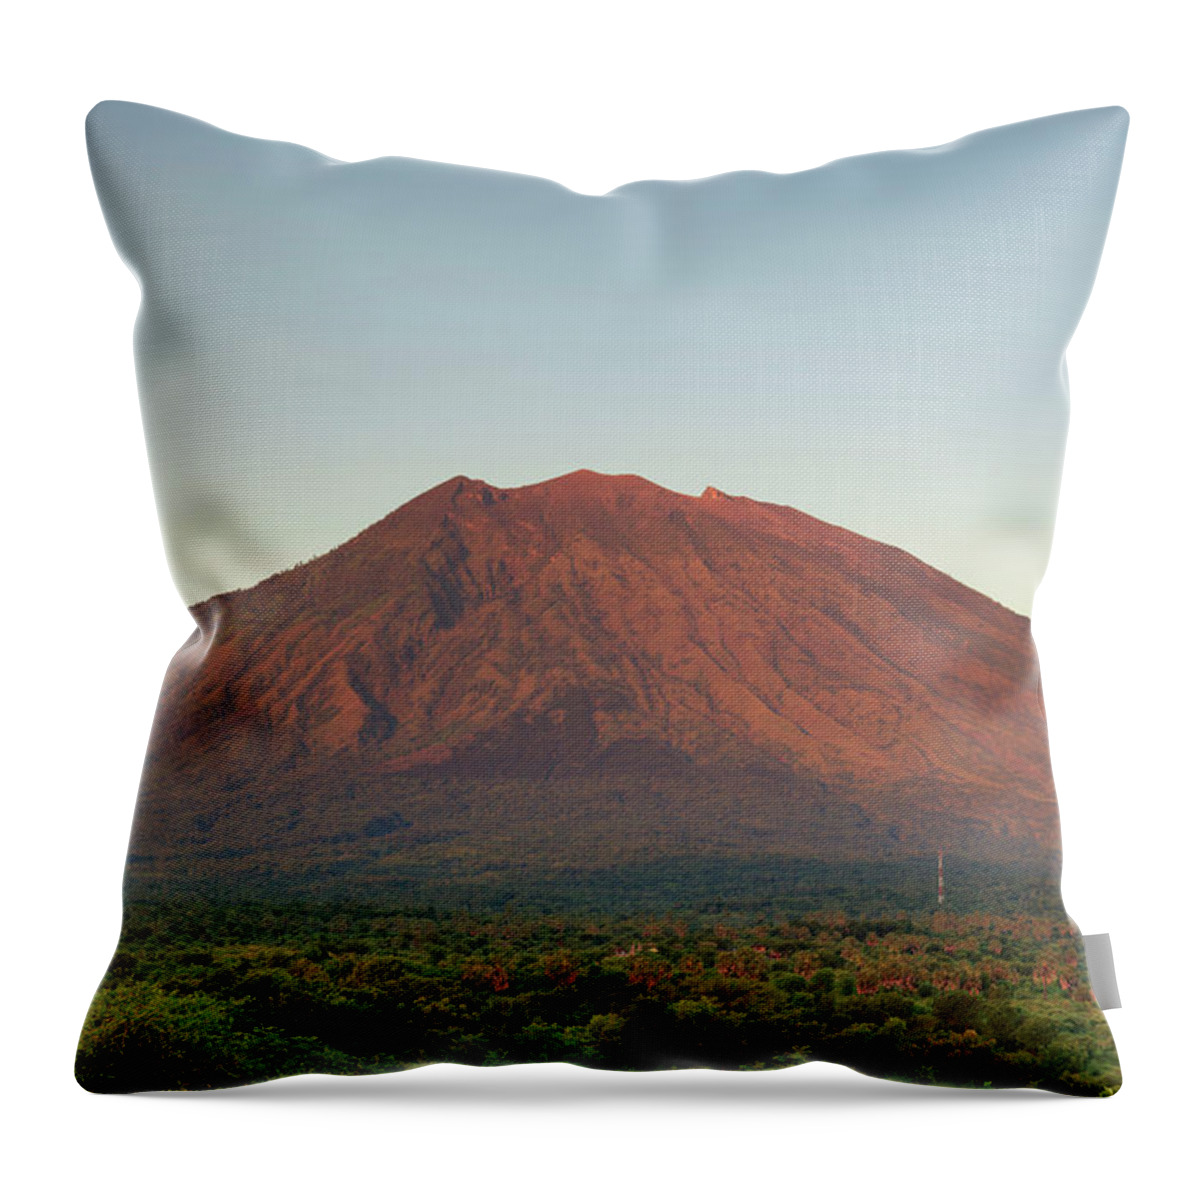 Tranquility Throw Pillow featuring the photograph Indonesia, Bali, Gunung Agung Volcano by Michele Falzone